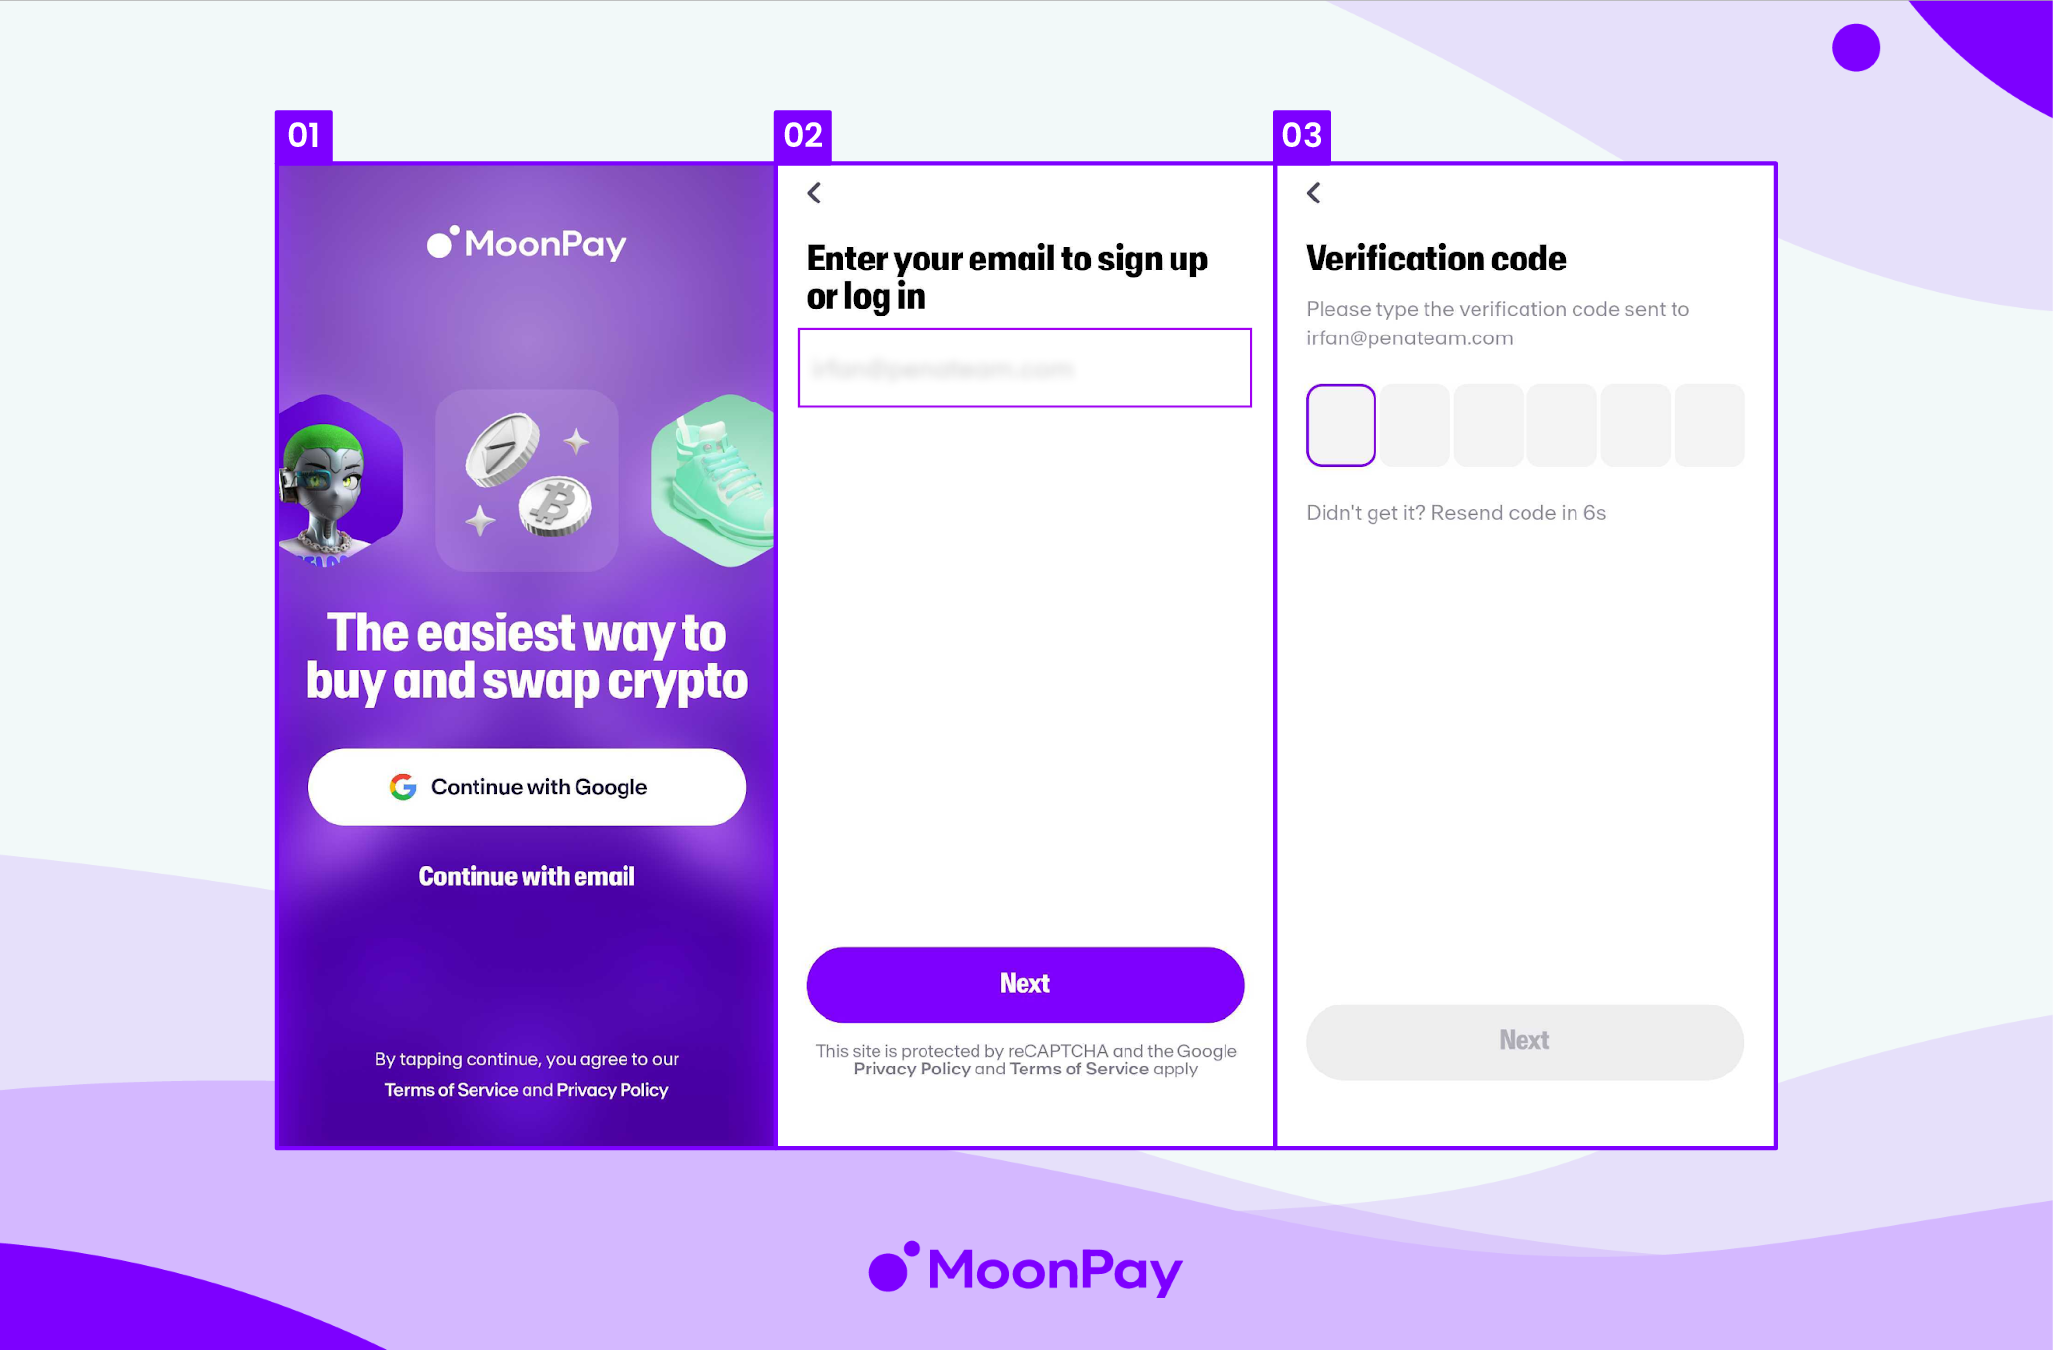 This is a step-by-step image on how to log in to MoonPay in a mobile app.